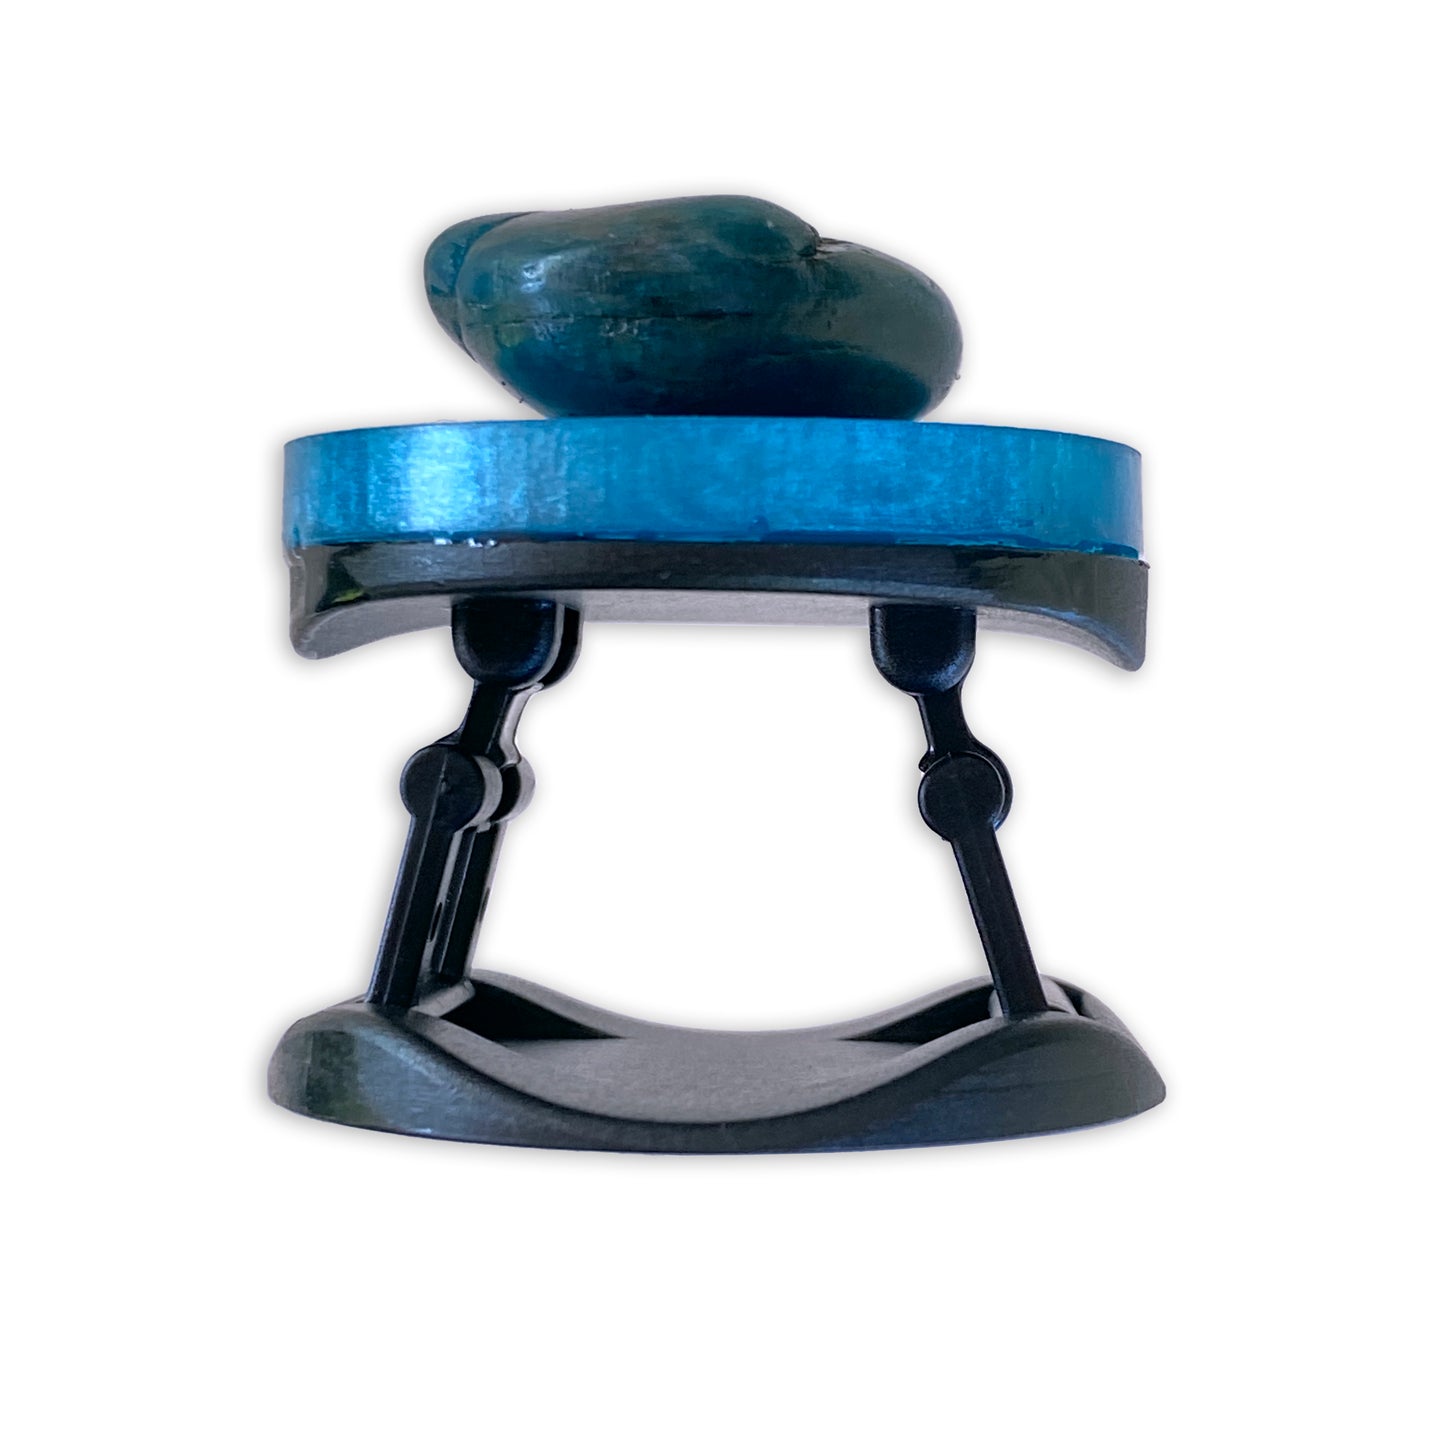 Blue Poured Resin Phone holder with Apatite Gemstone